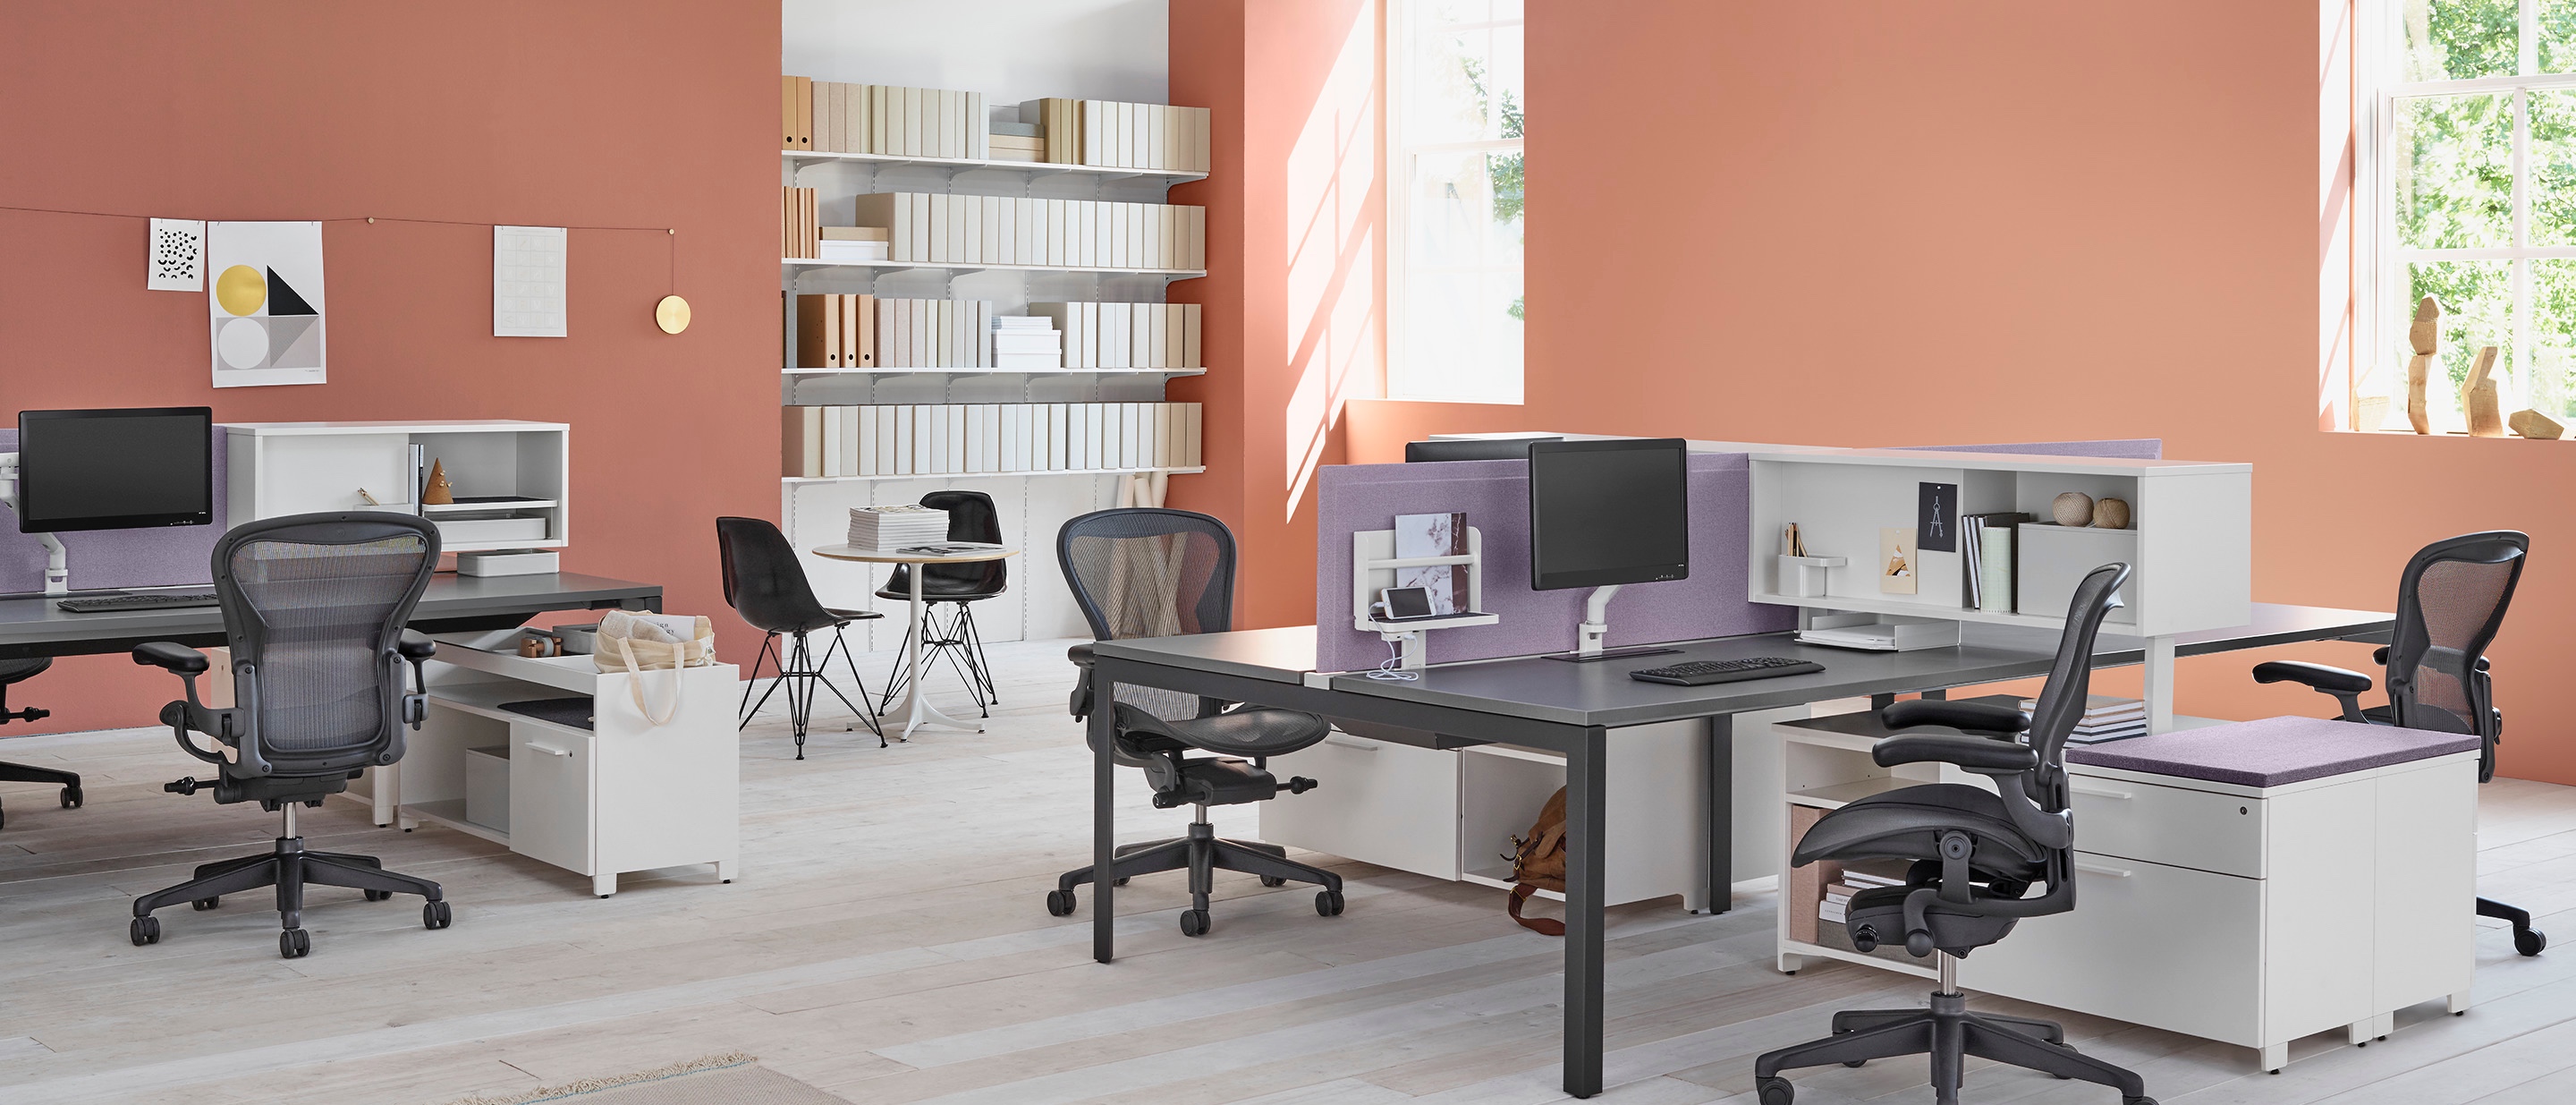 A workspace setting with two Layout Studio benches with purple fabric center privacy screens, Aeron Chairs, Tu Storage cubbies, and Tu credenzas.